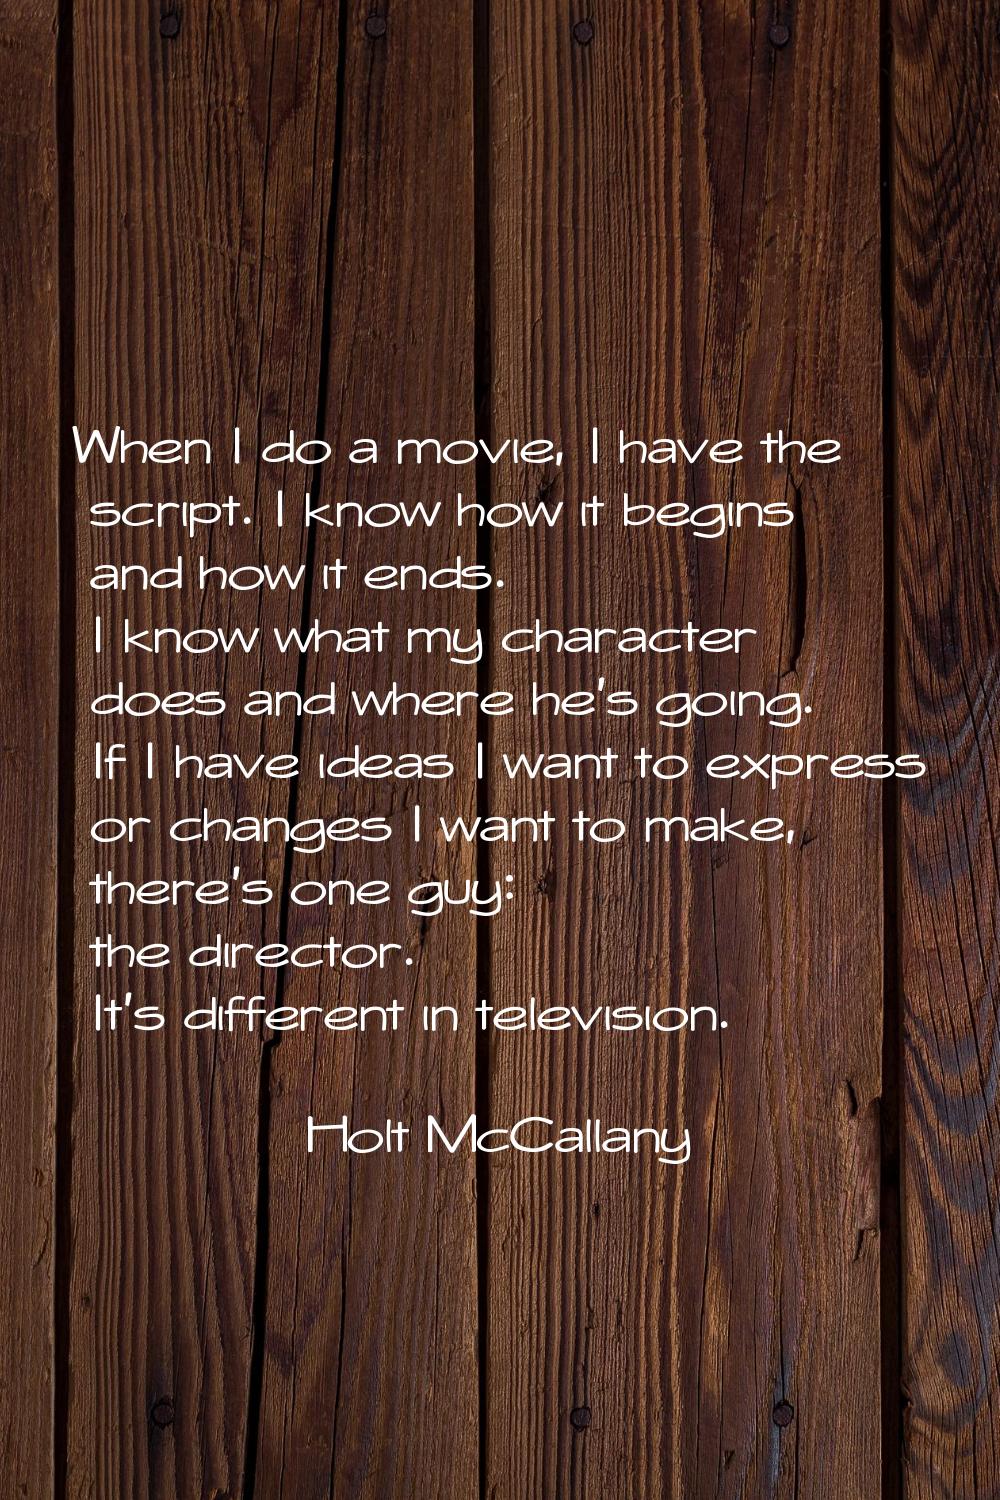 When I do a movie, I have the script. I know how it begins and how it ends. I know what my characte